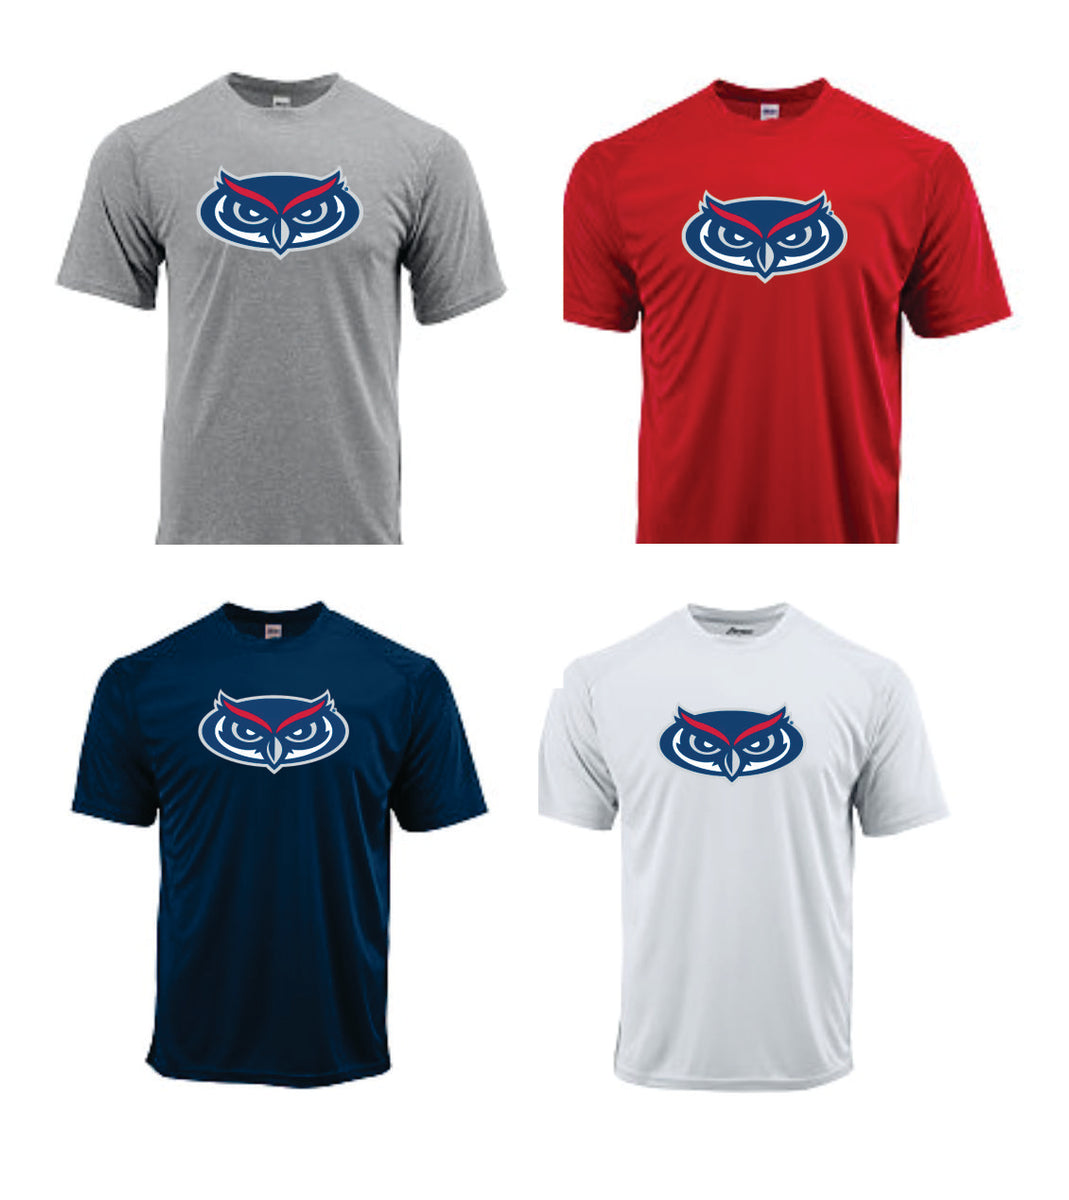 OFO Short Sleeve Logo T-Shirt in White/Navy - Old Florida Outfitters